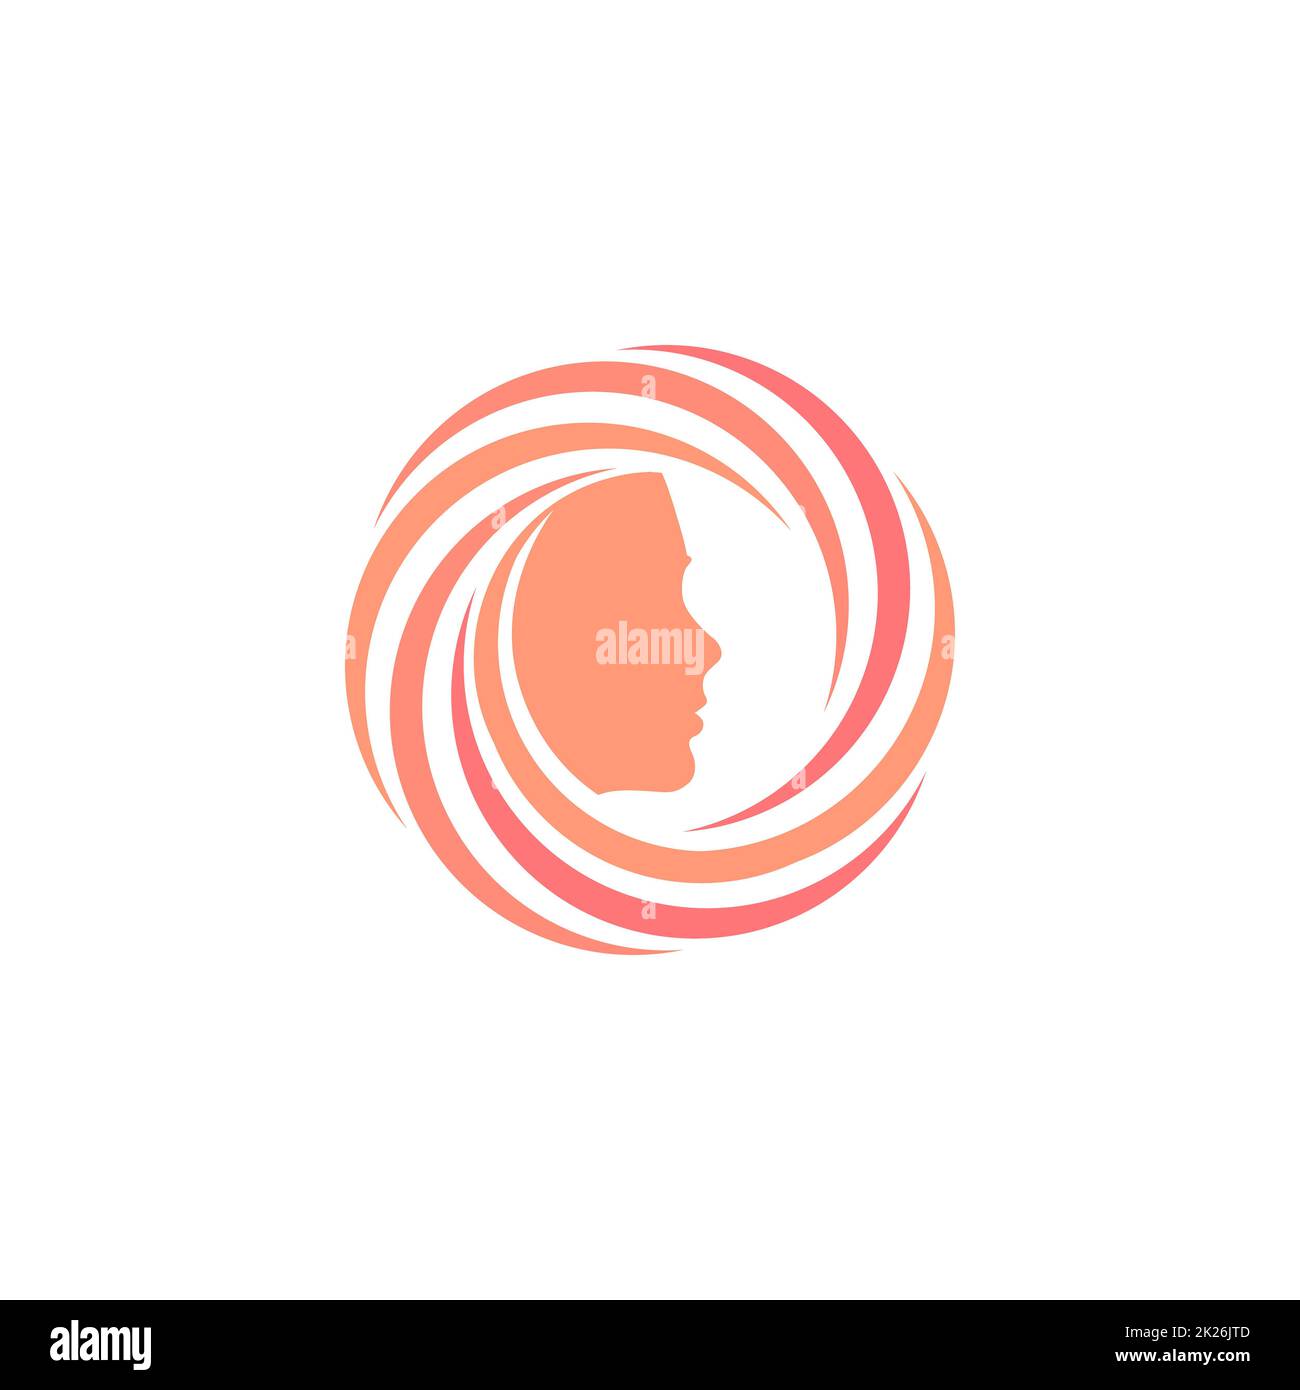 Circular logo with a face inside the ring. Abstract hair care products symbol, shampoo and hair styling styles for women and girls round vortex logo. Stock Photo